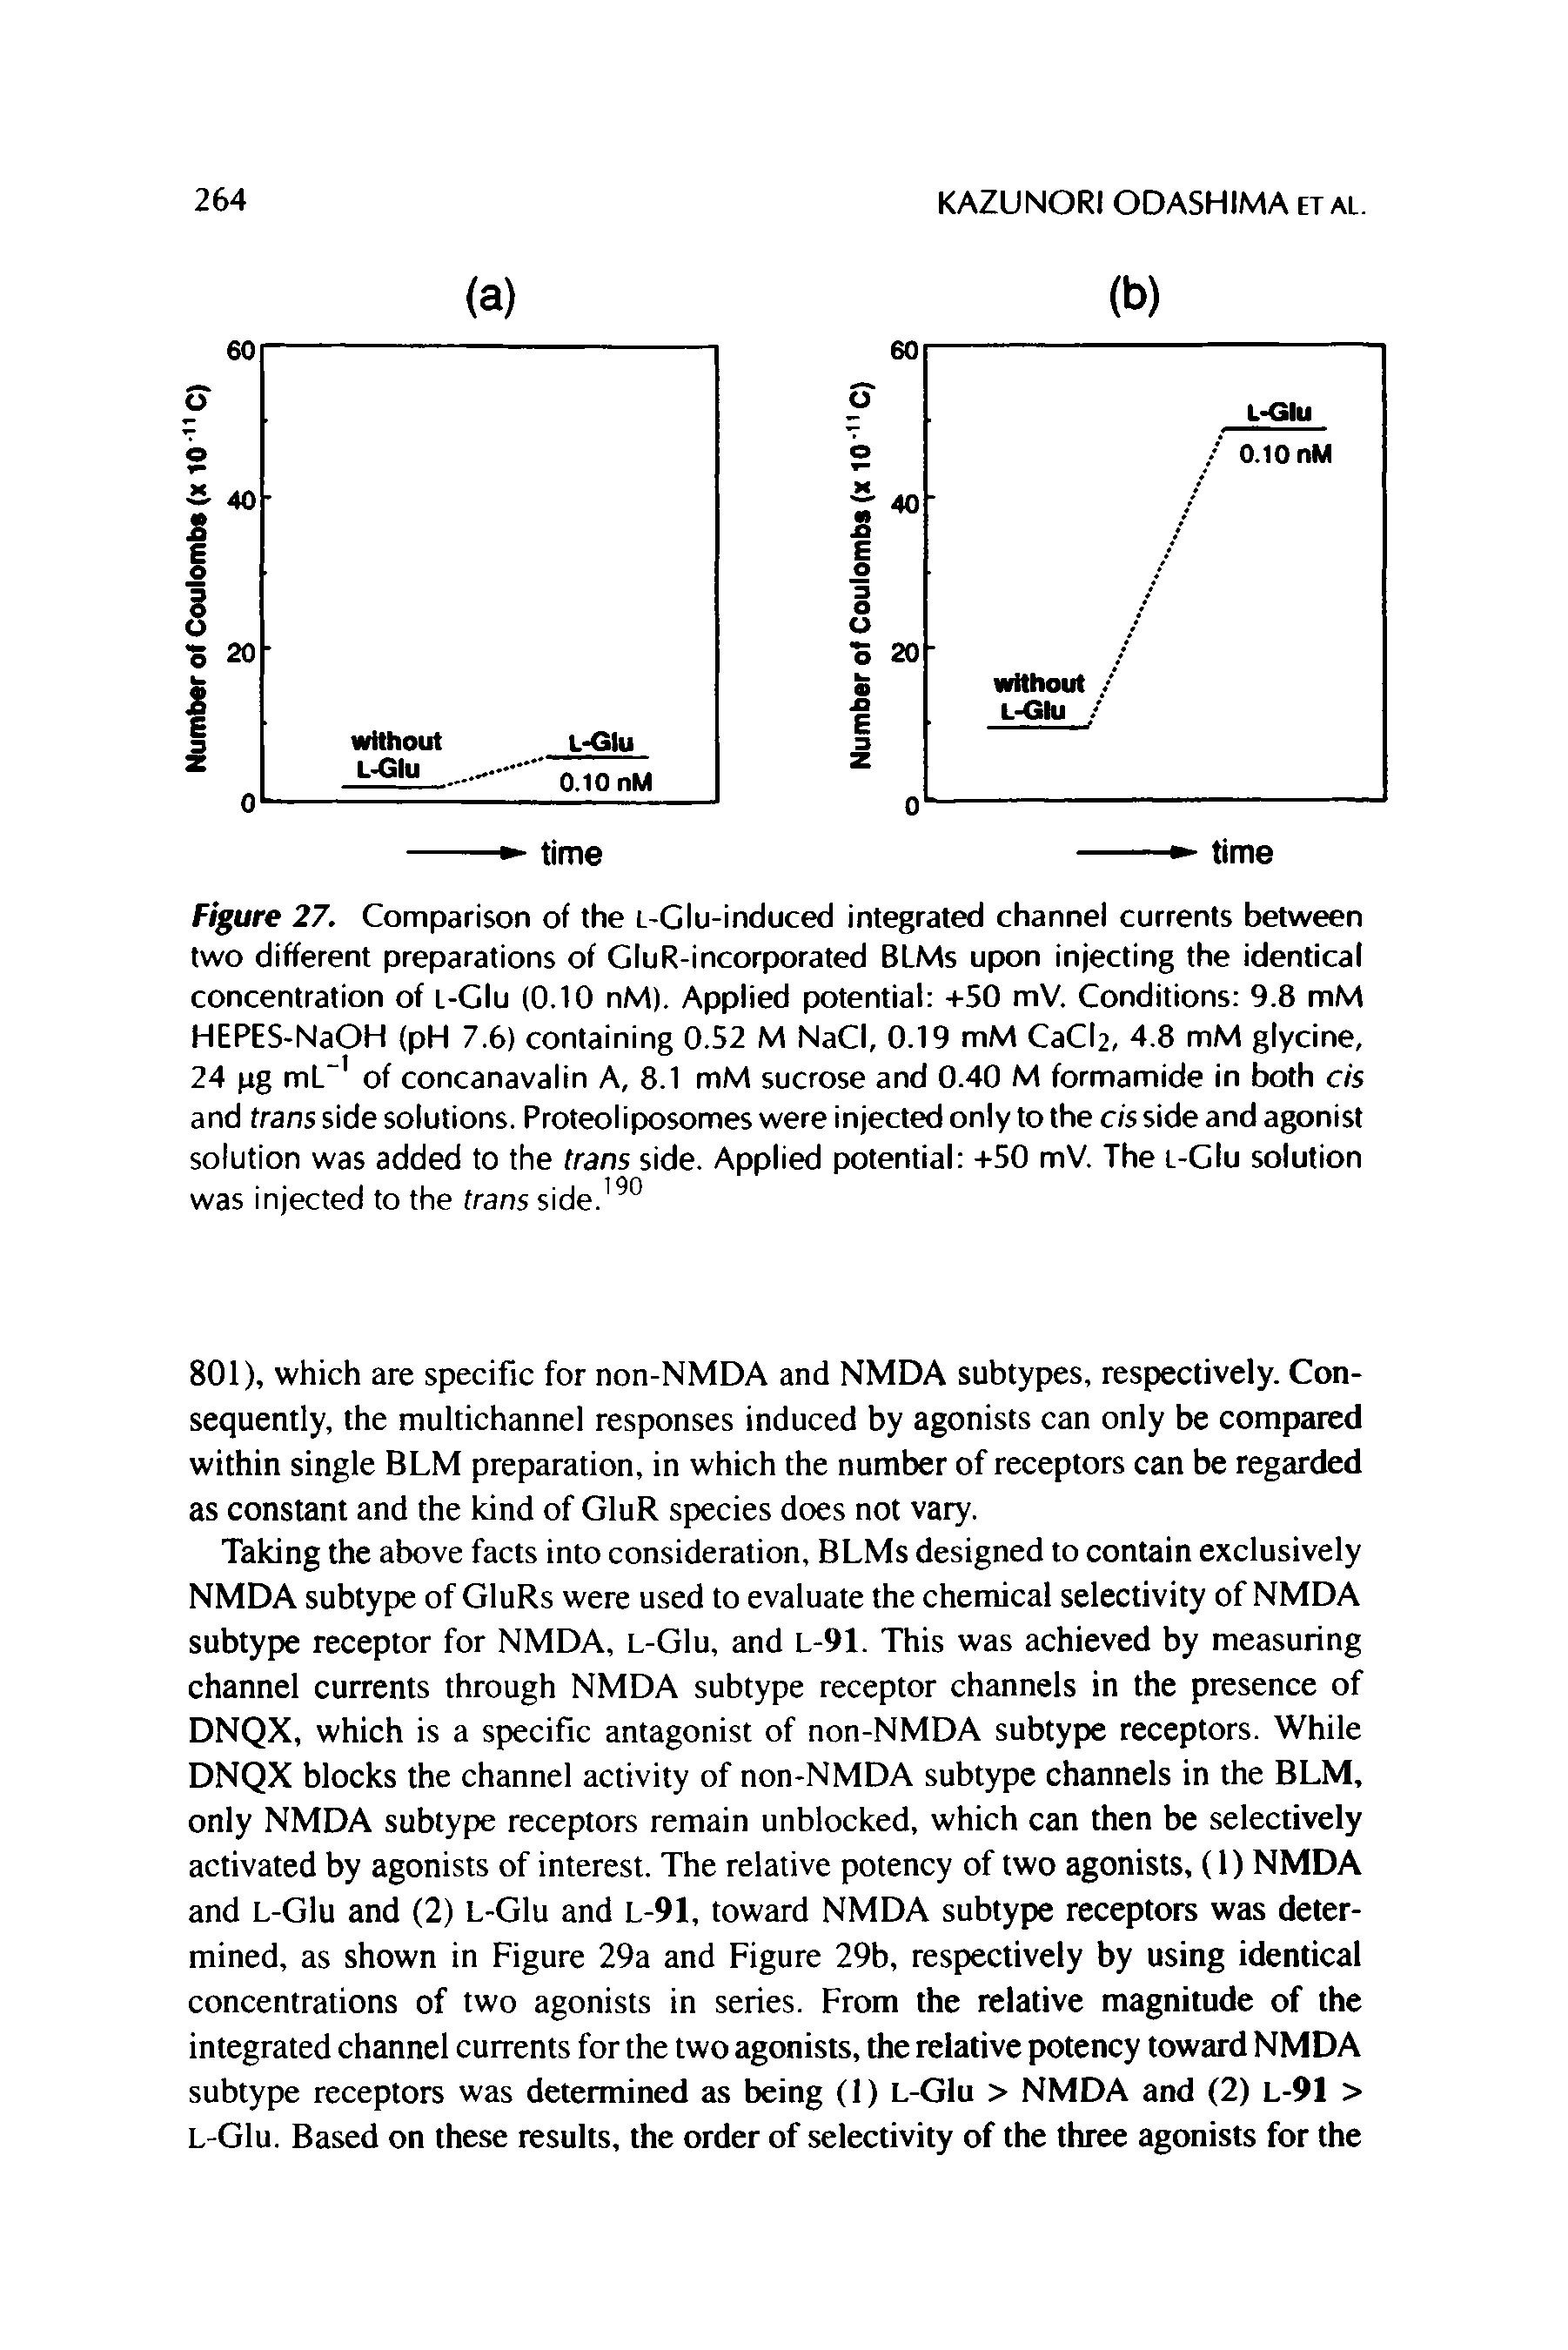 Figure 27. Comparison of the L-Clu-induced integrated channel currents between two different preparations of GluR-incorporated BLMs upon injecting the identical concentration of l-GIu (0.10 nM). Applied potential +50 mV. Conditions 9.8 mM HEPES-NaOH (pH 7.6) containing 0.52 M NaCI, 0.19 mM CaCl2, 4.8 mM glycine, 24 pg mL of concanavalin A, 8.1 mM sucrose and 0.40 M formamide in both cis and trans side solutions. Proteoliposomes were injected only to the cis side and agonist solution was added to the trans side. Applied potential +50 mV. The l-GIu solution was injected to the trans side. ...